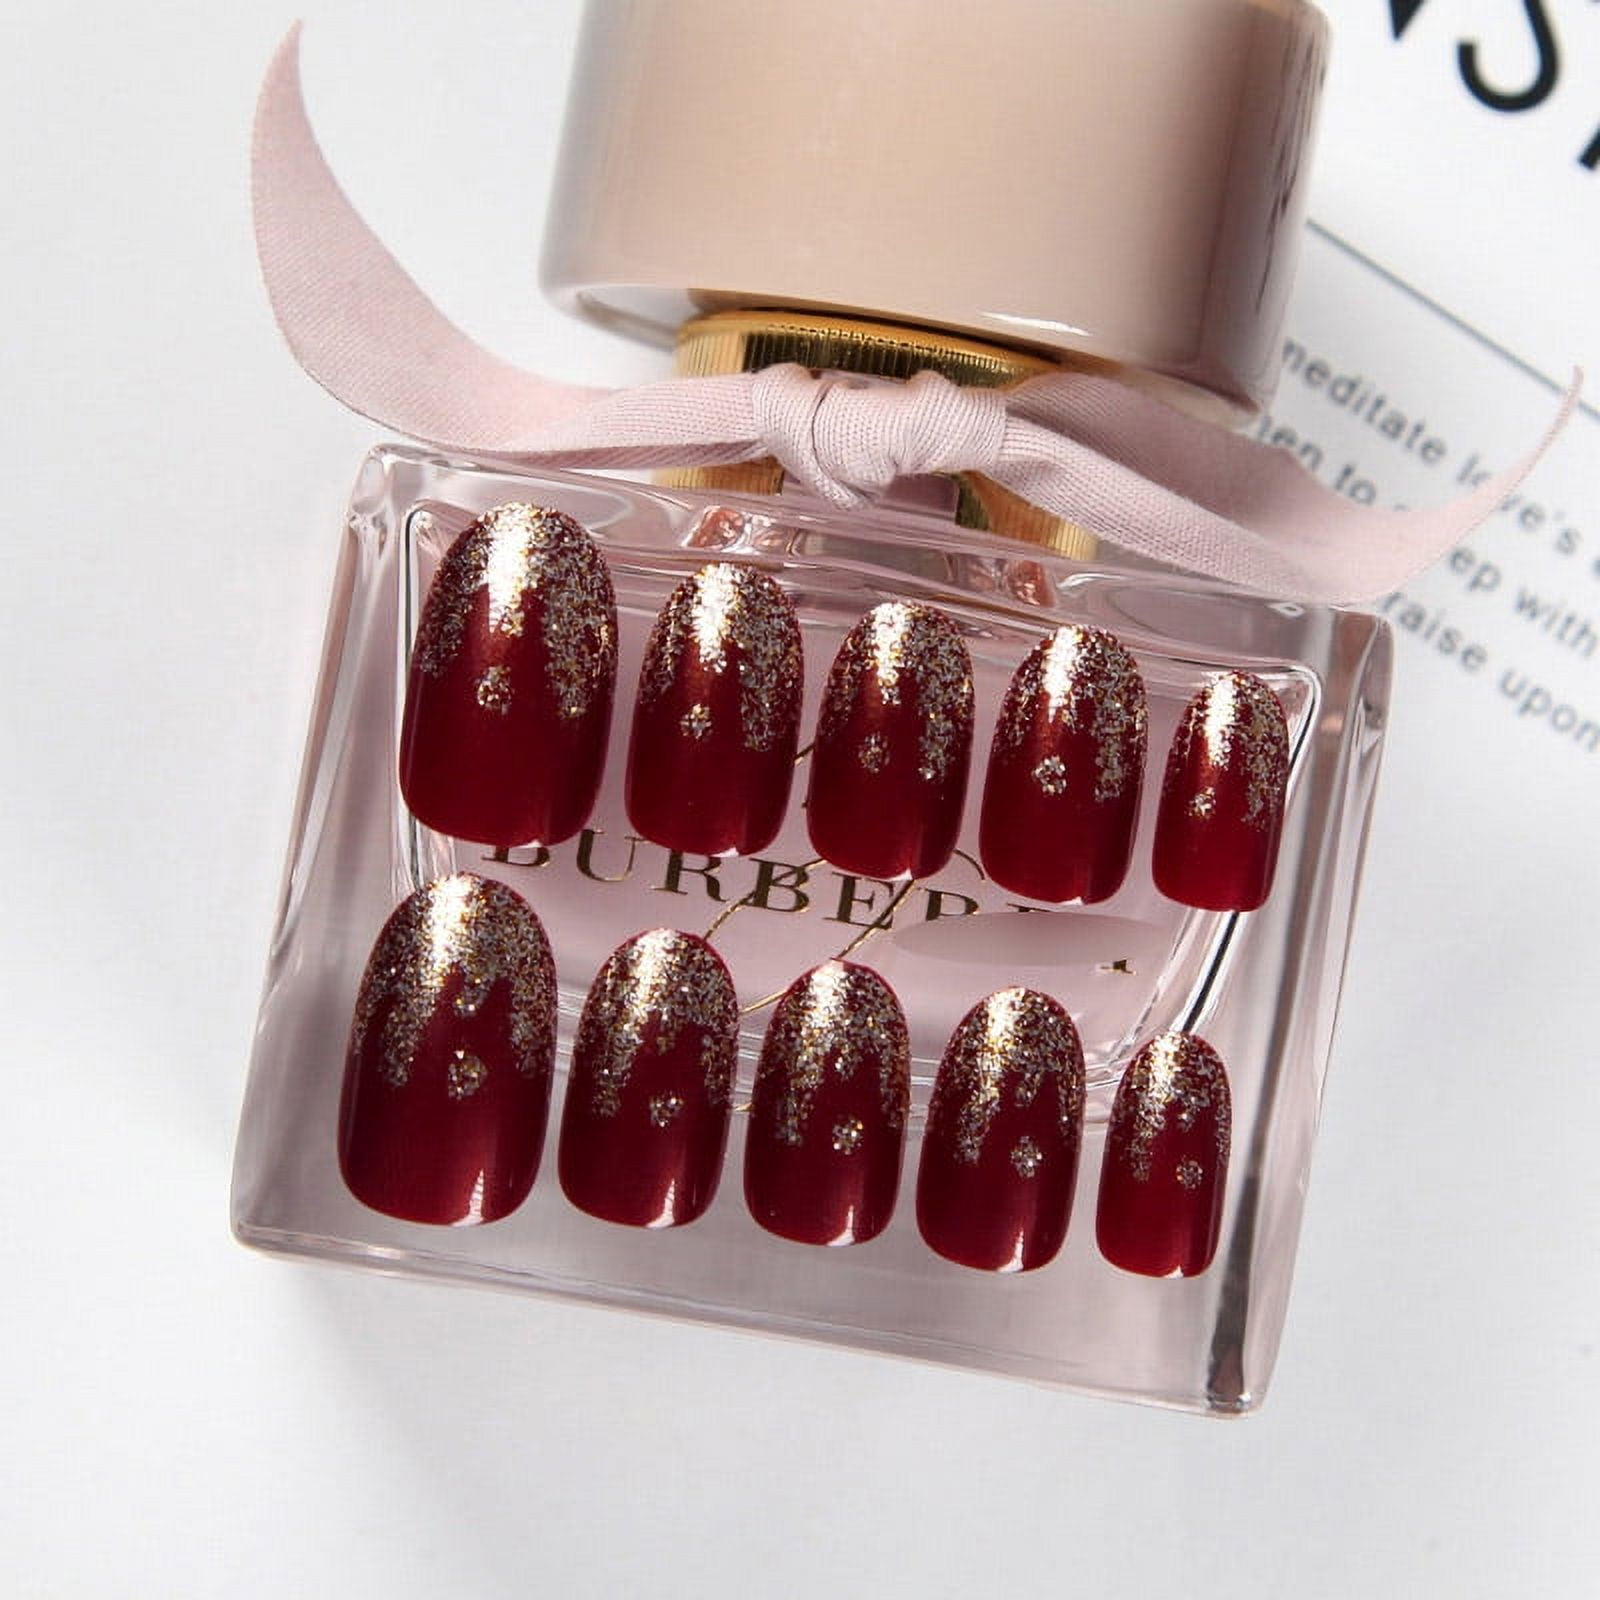 RED COFFIN NAILS WITH BLING - ACRYLIC NAILS 2020 - YouTube